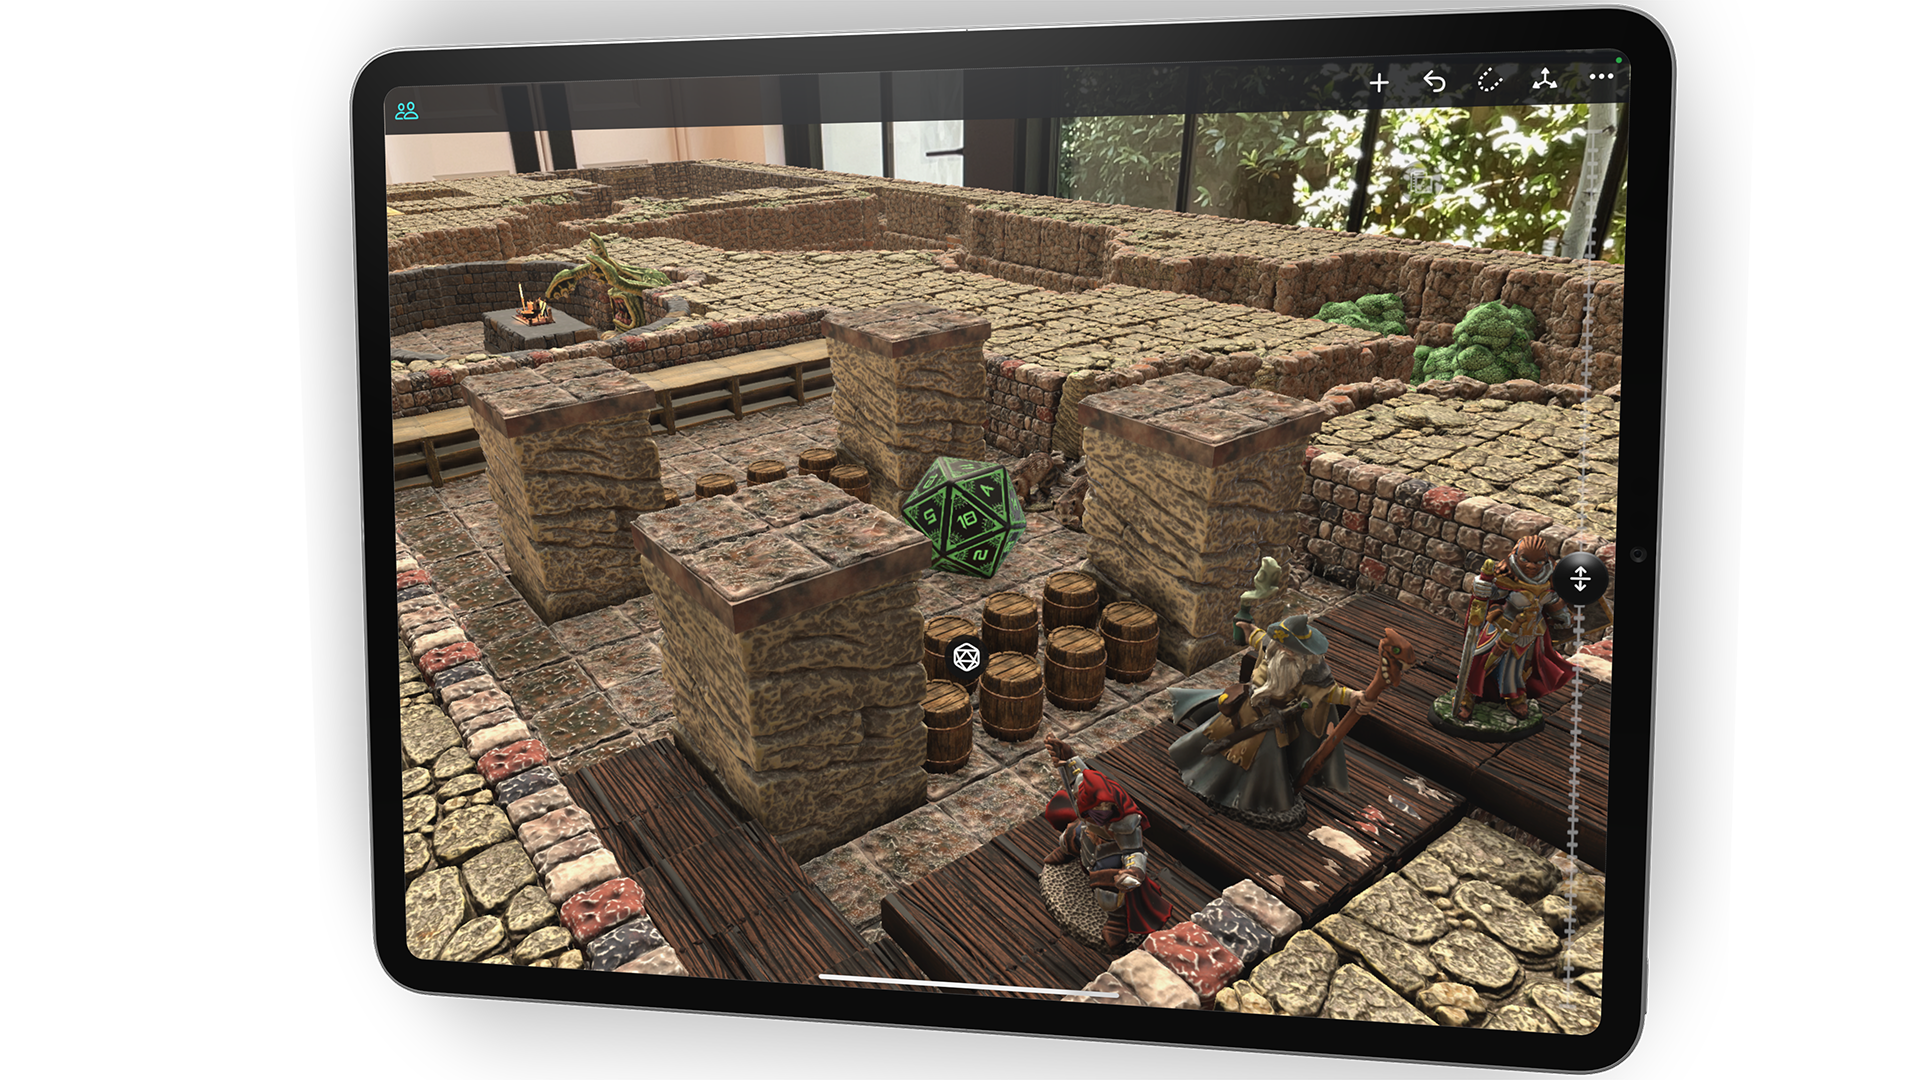 Mirrorscape Augmented Reality Dungeon Mockup close up view of miniature building interior